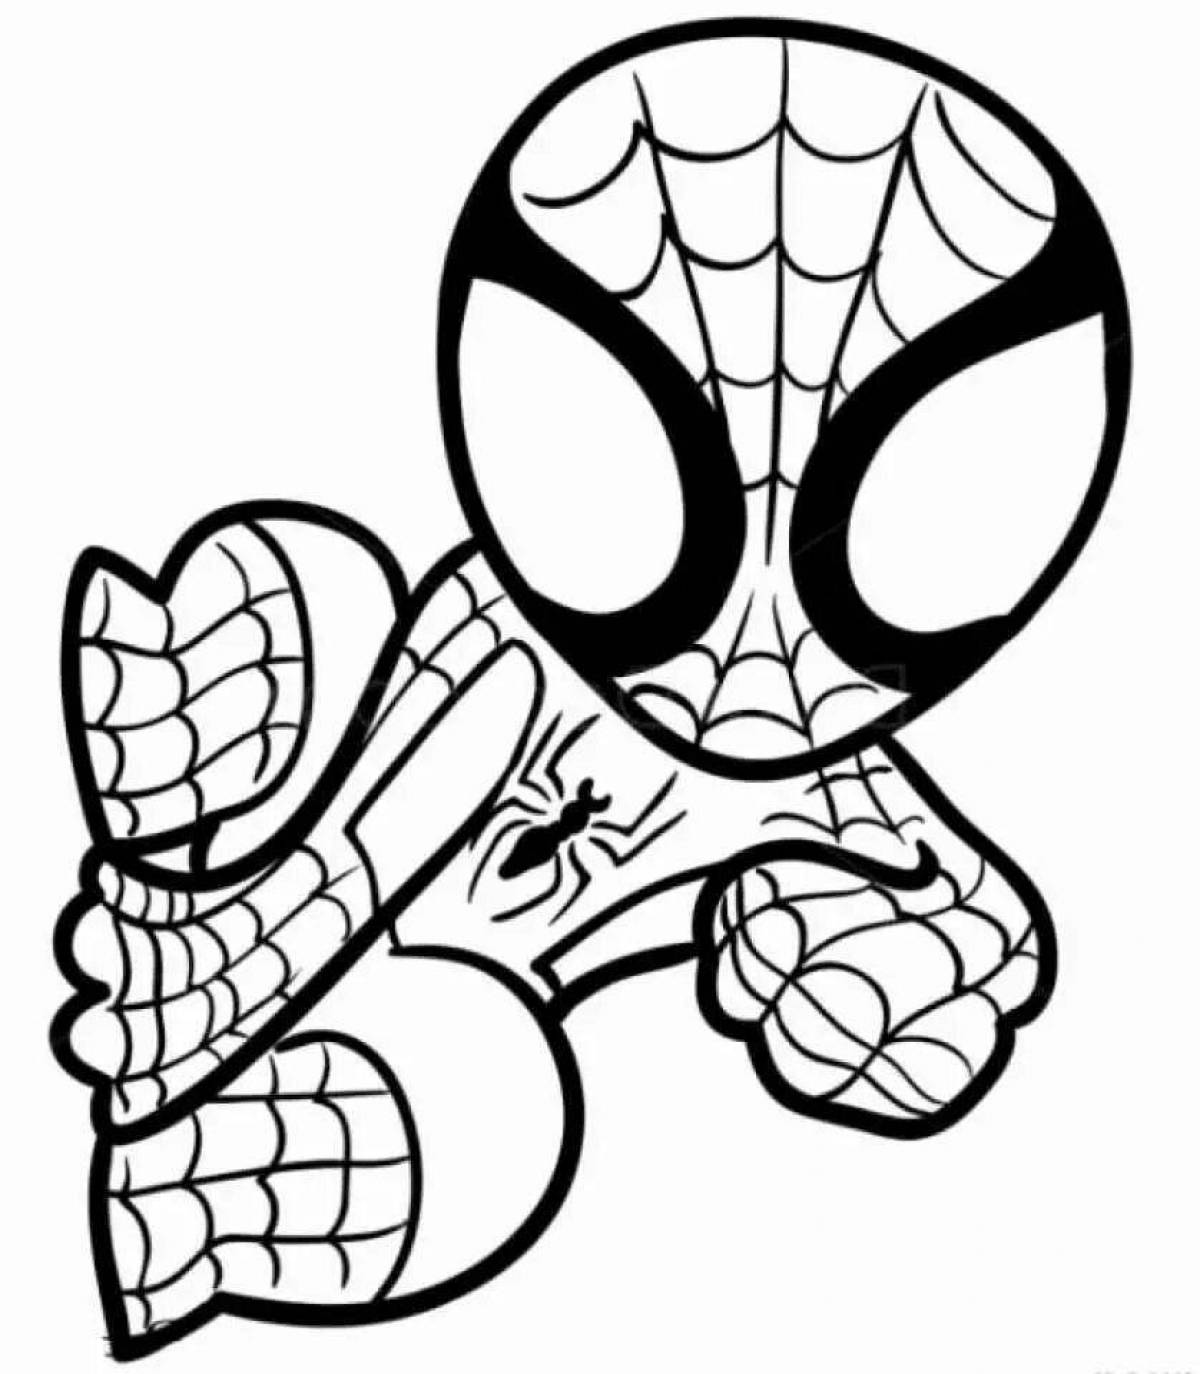 Monumental marvel spiderman coloring page